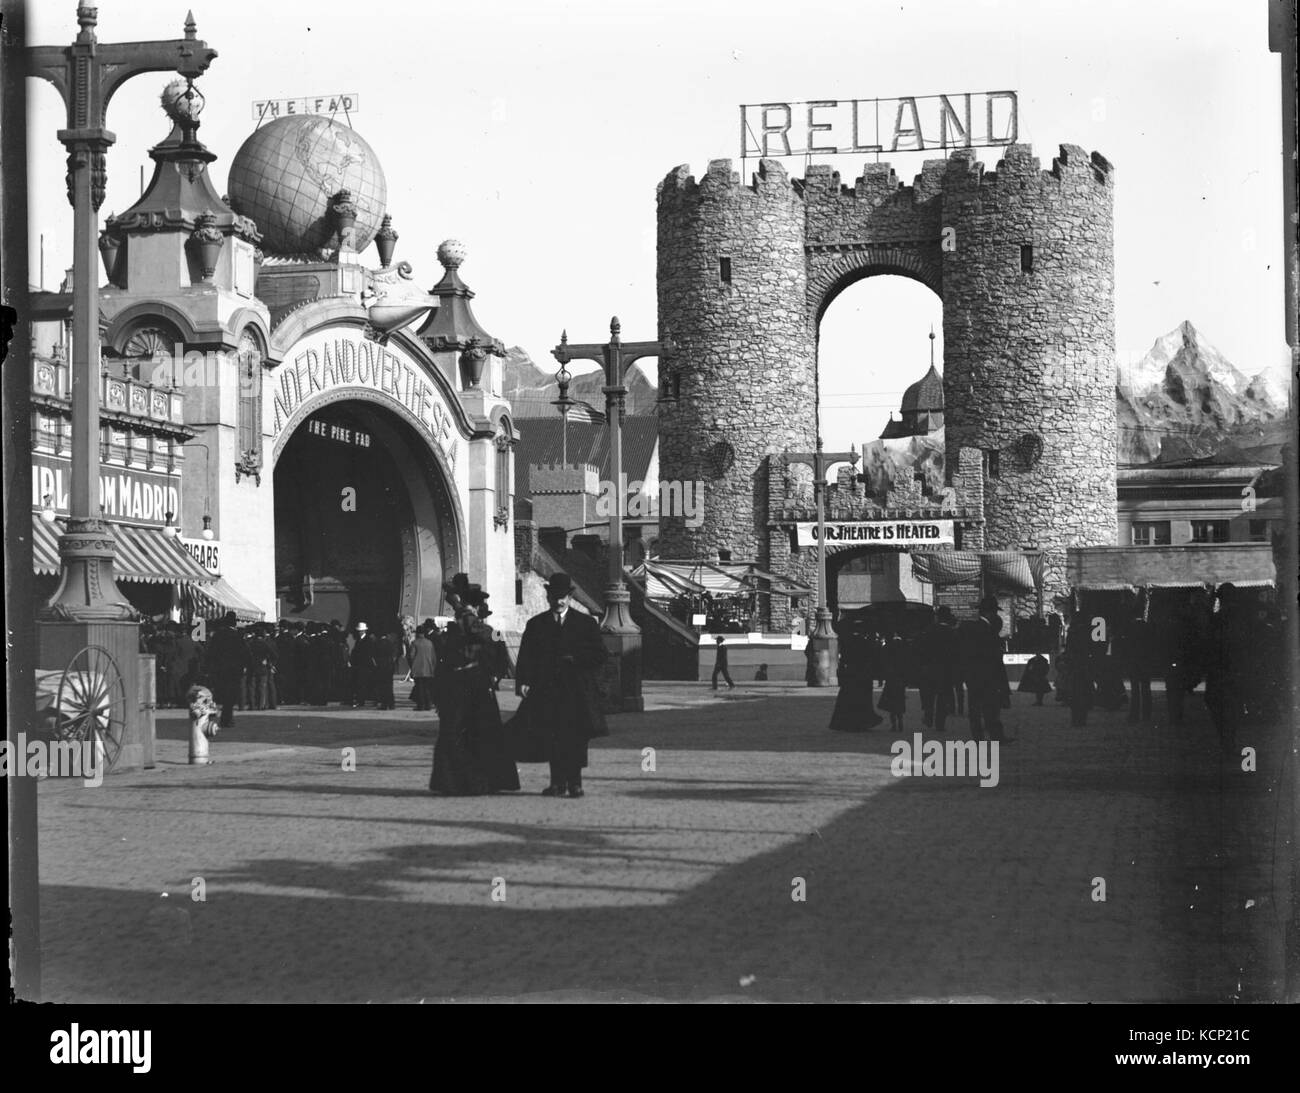 Entrances to Over and Under the Sea and the Irish Village attractions on the Pike at the 1904 World's Fair Stock Photo